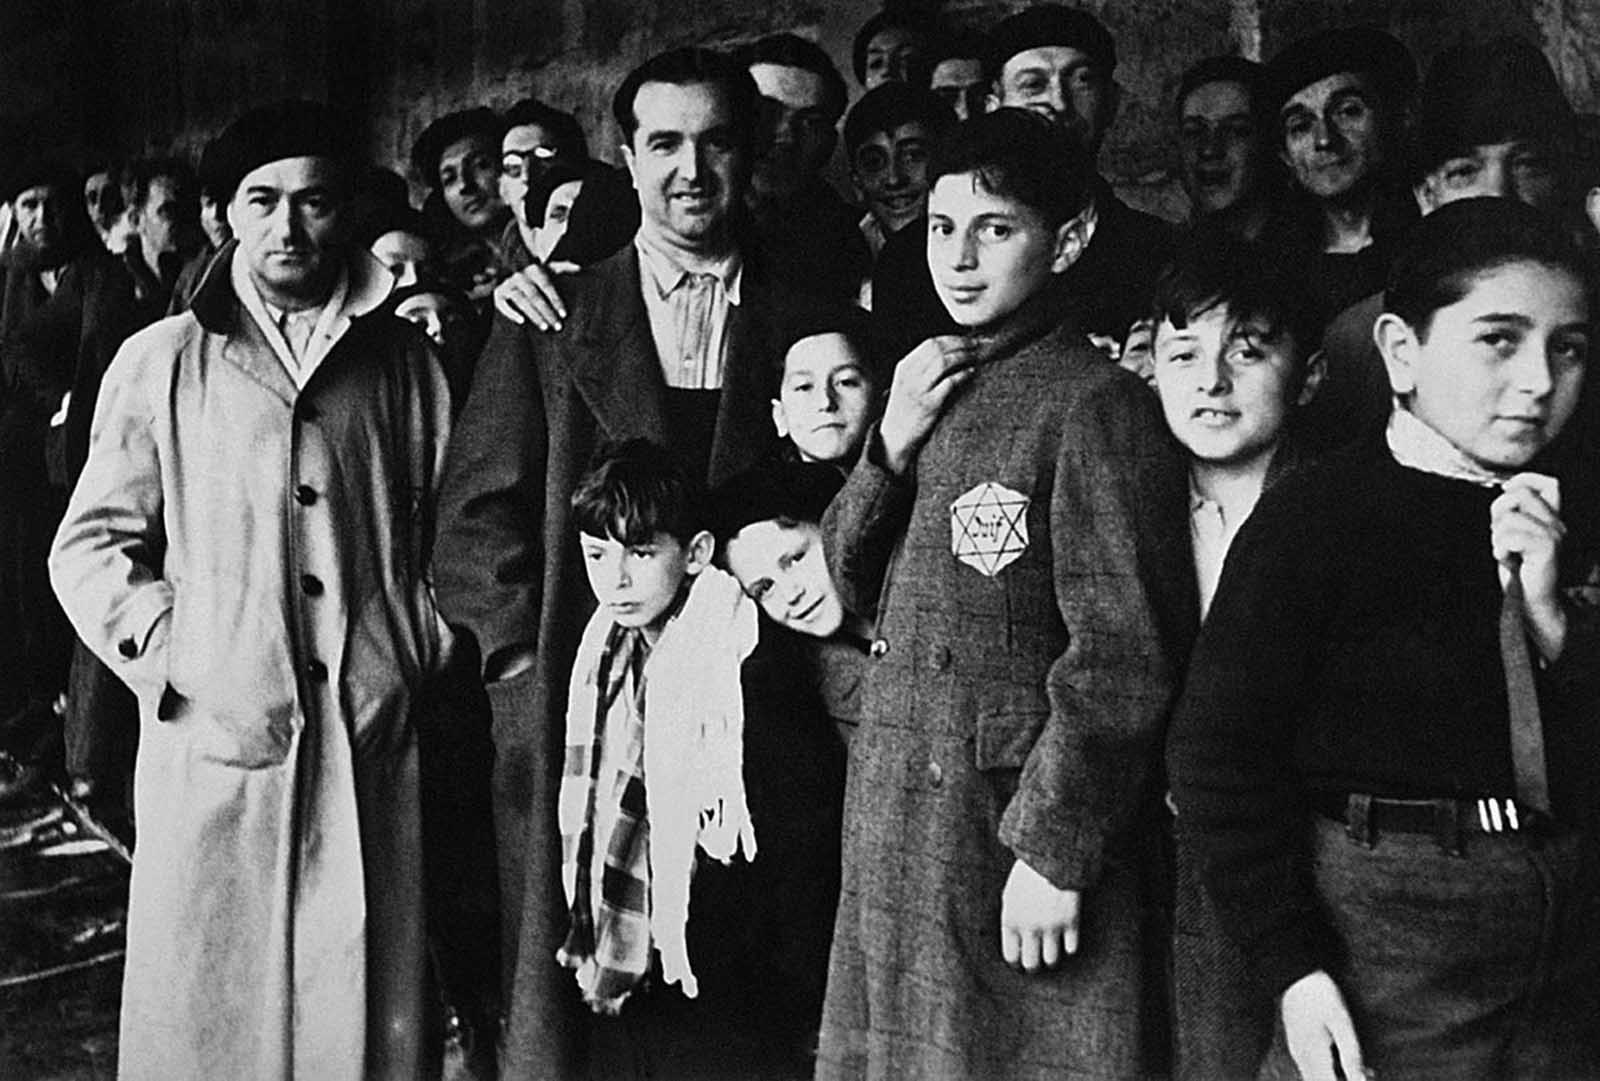 Jewish deportees in the Drancy transit camp near Paris, France, in 1942, on their last stop before the German concentration camps. Some 13,152 Jews (including 4,115 children) were rounded up by French police forces, taken from their homes to the 